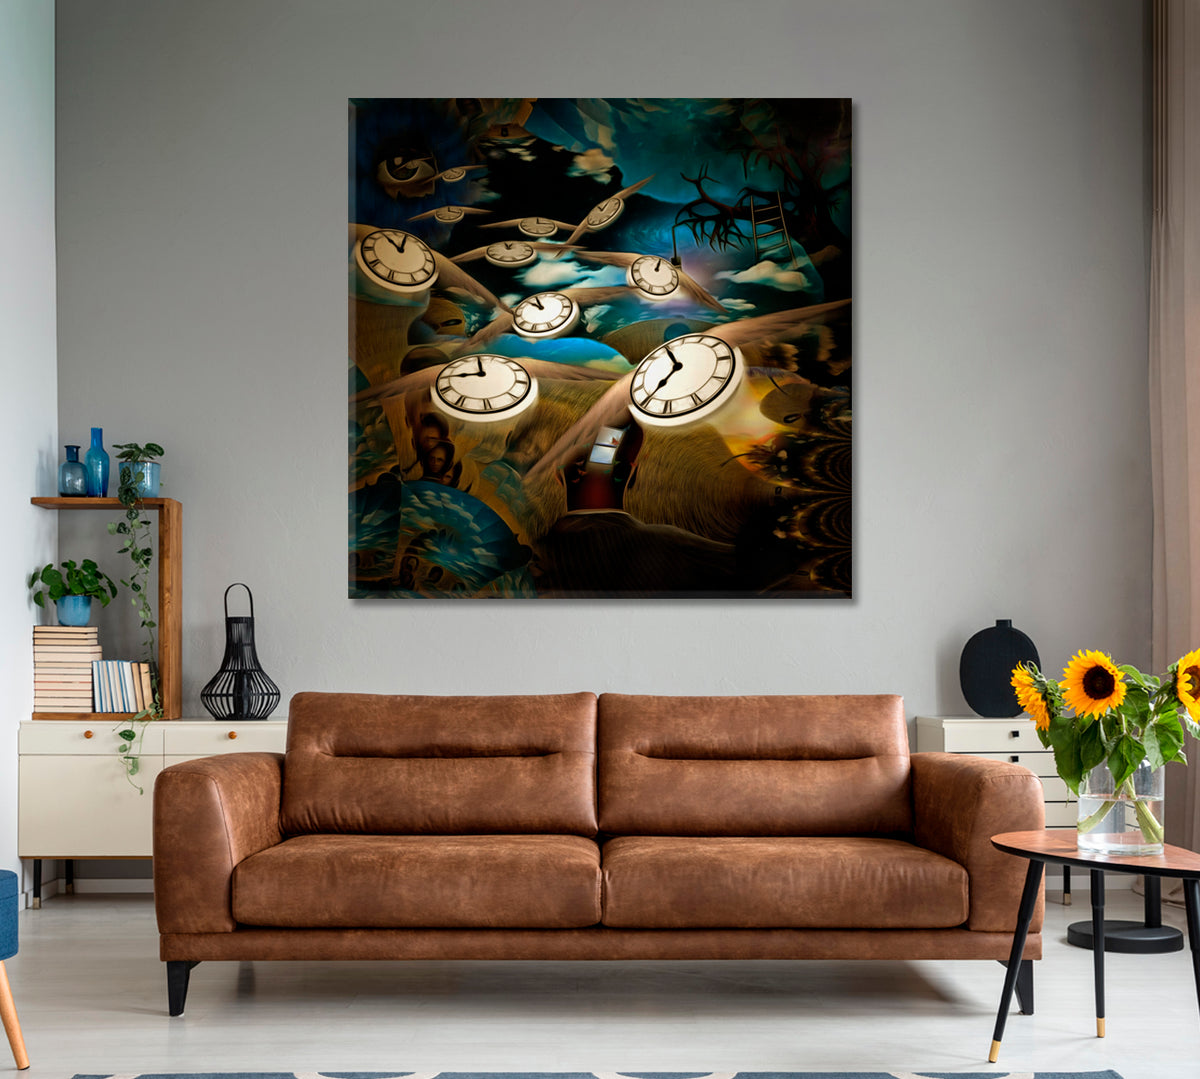 FLOW OF TIME Lord Eye And Winged Clocks Surreal Painting Surreal Fantasy Large Art Print Décor Artesty 1 Panel 12"x12" 